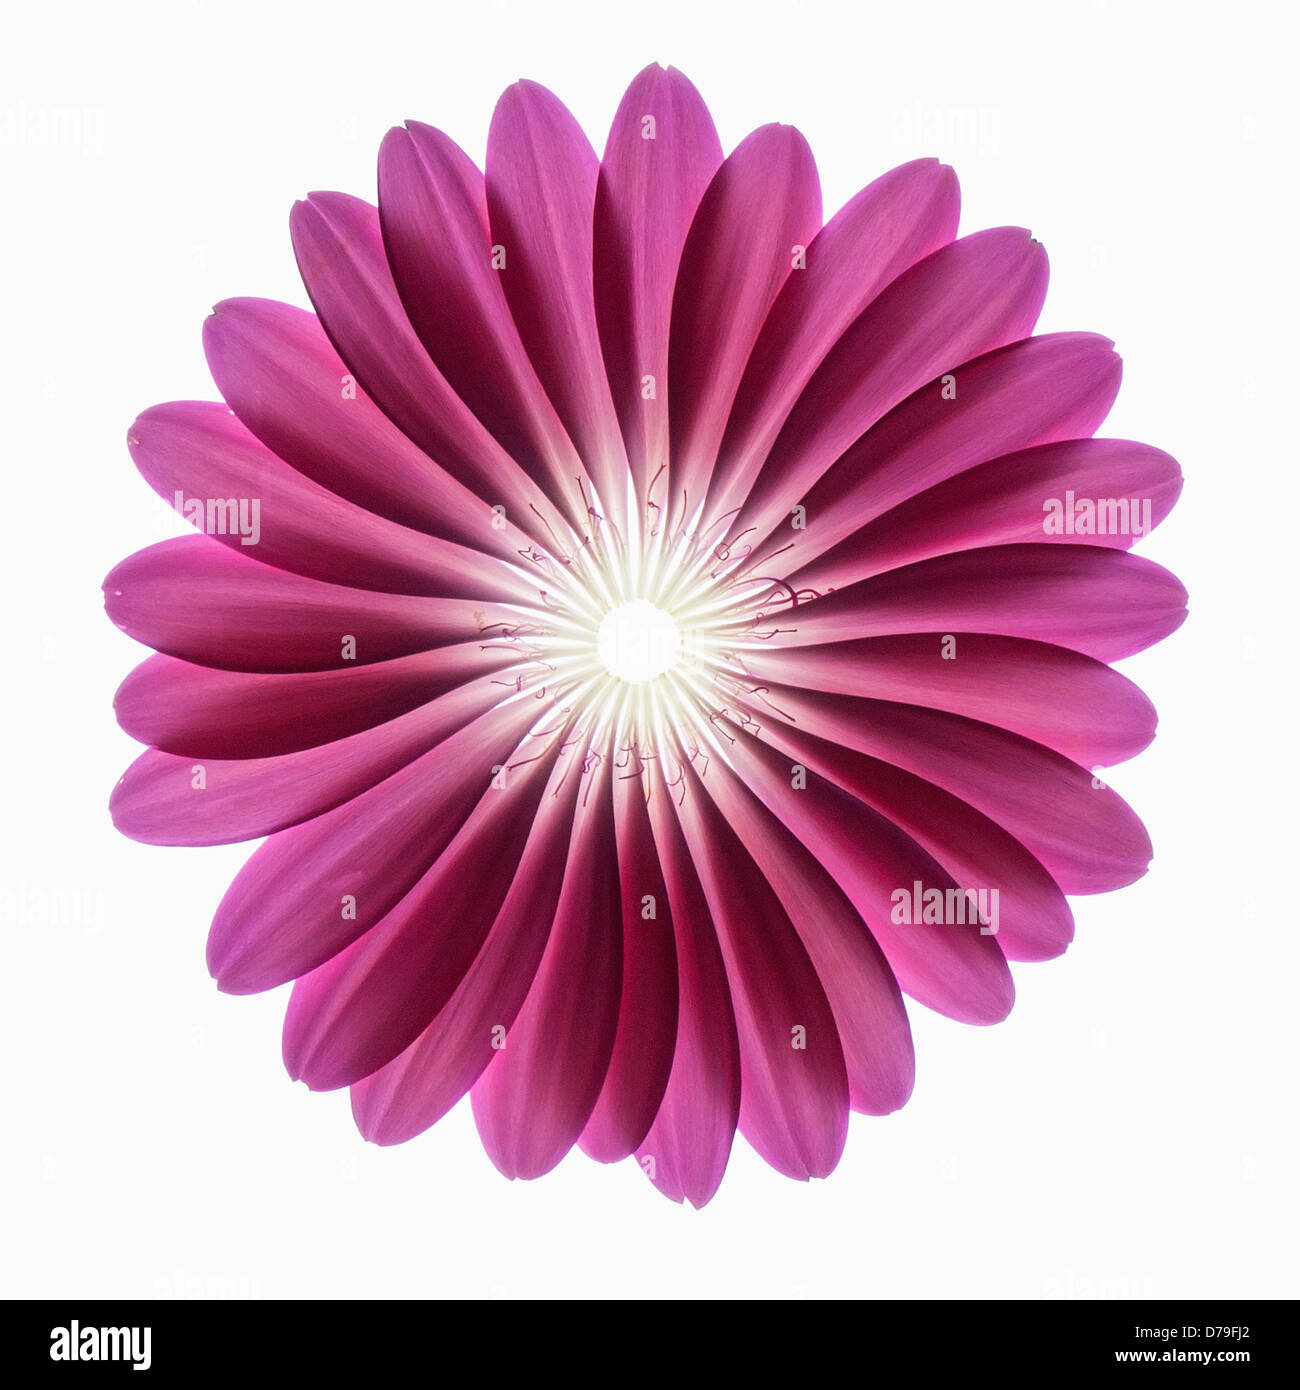 Gerbera jamesonii 'Serena', Individual purple petals placed into a circular forming a Gerbera flower against a white backgroun. Stock Photo